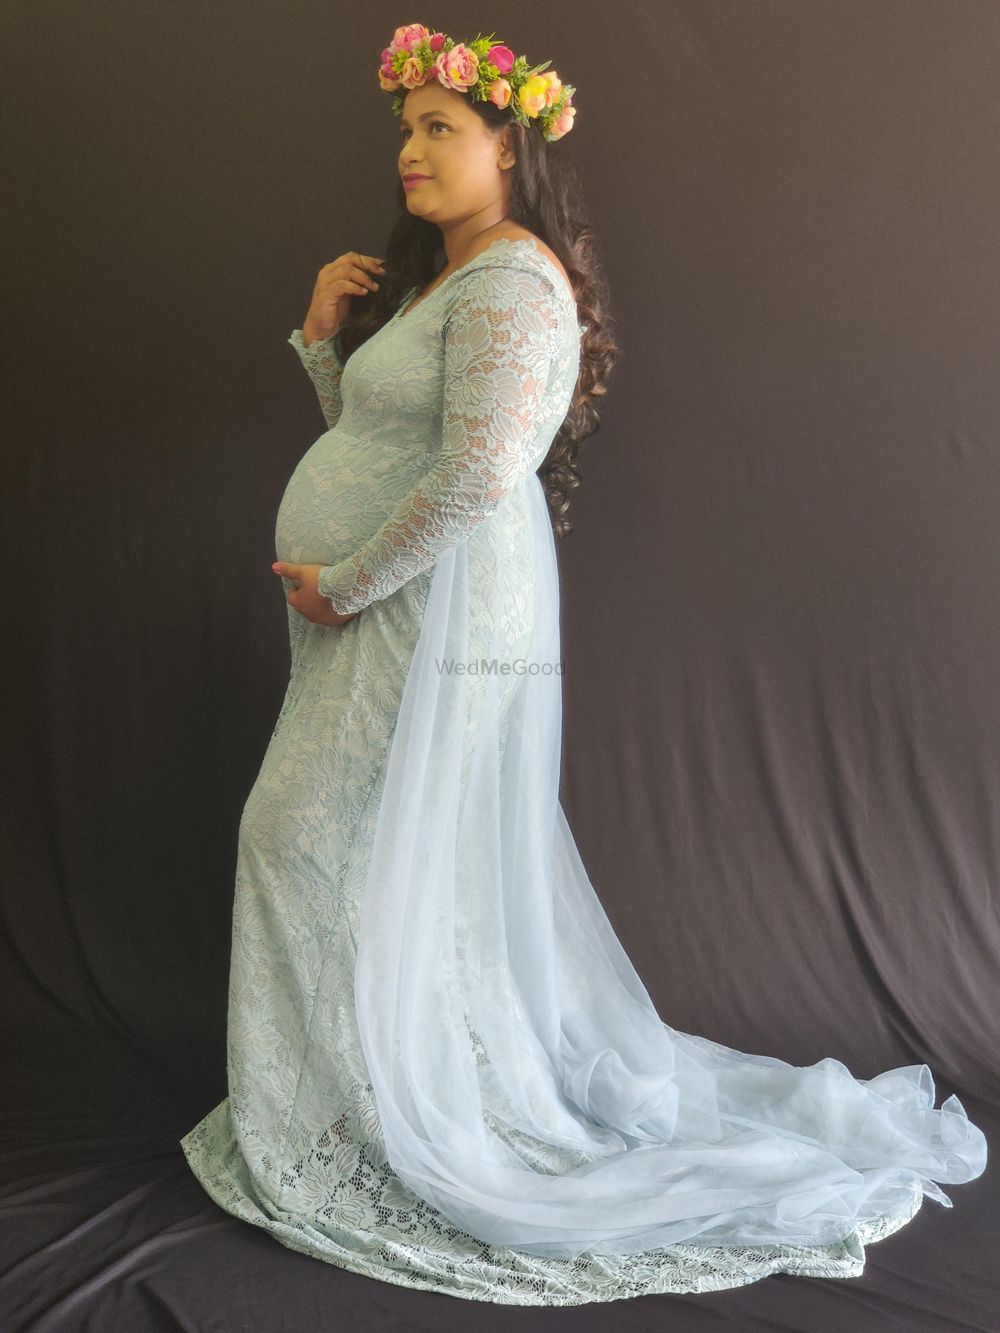 Photo From maternity Make-up shoots - By Aarti- Makeup Artist & Hair Stylist